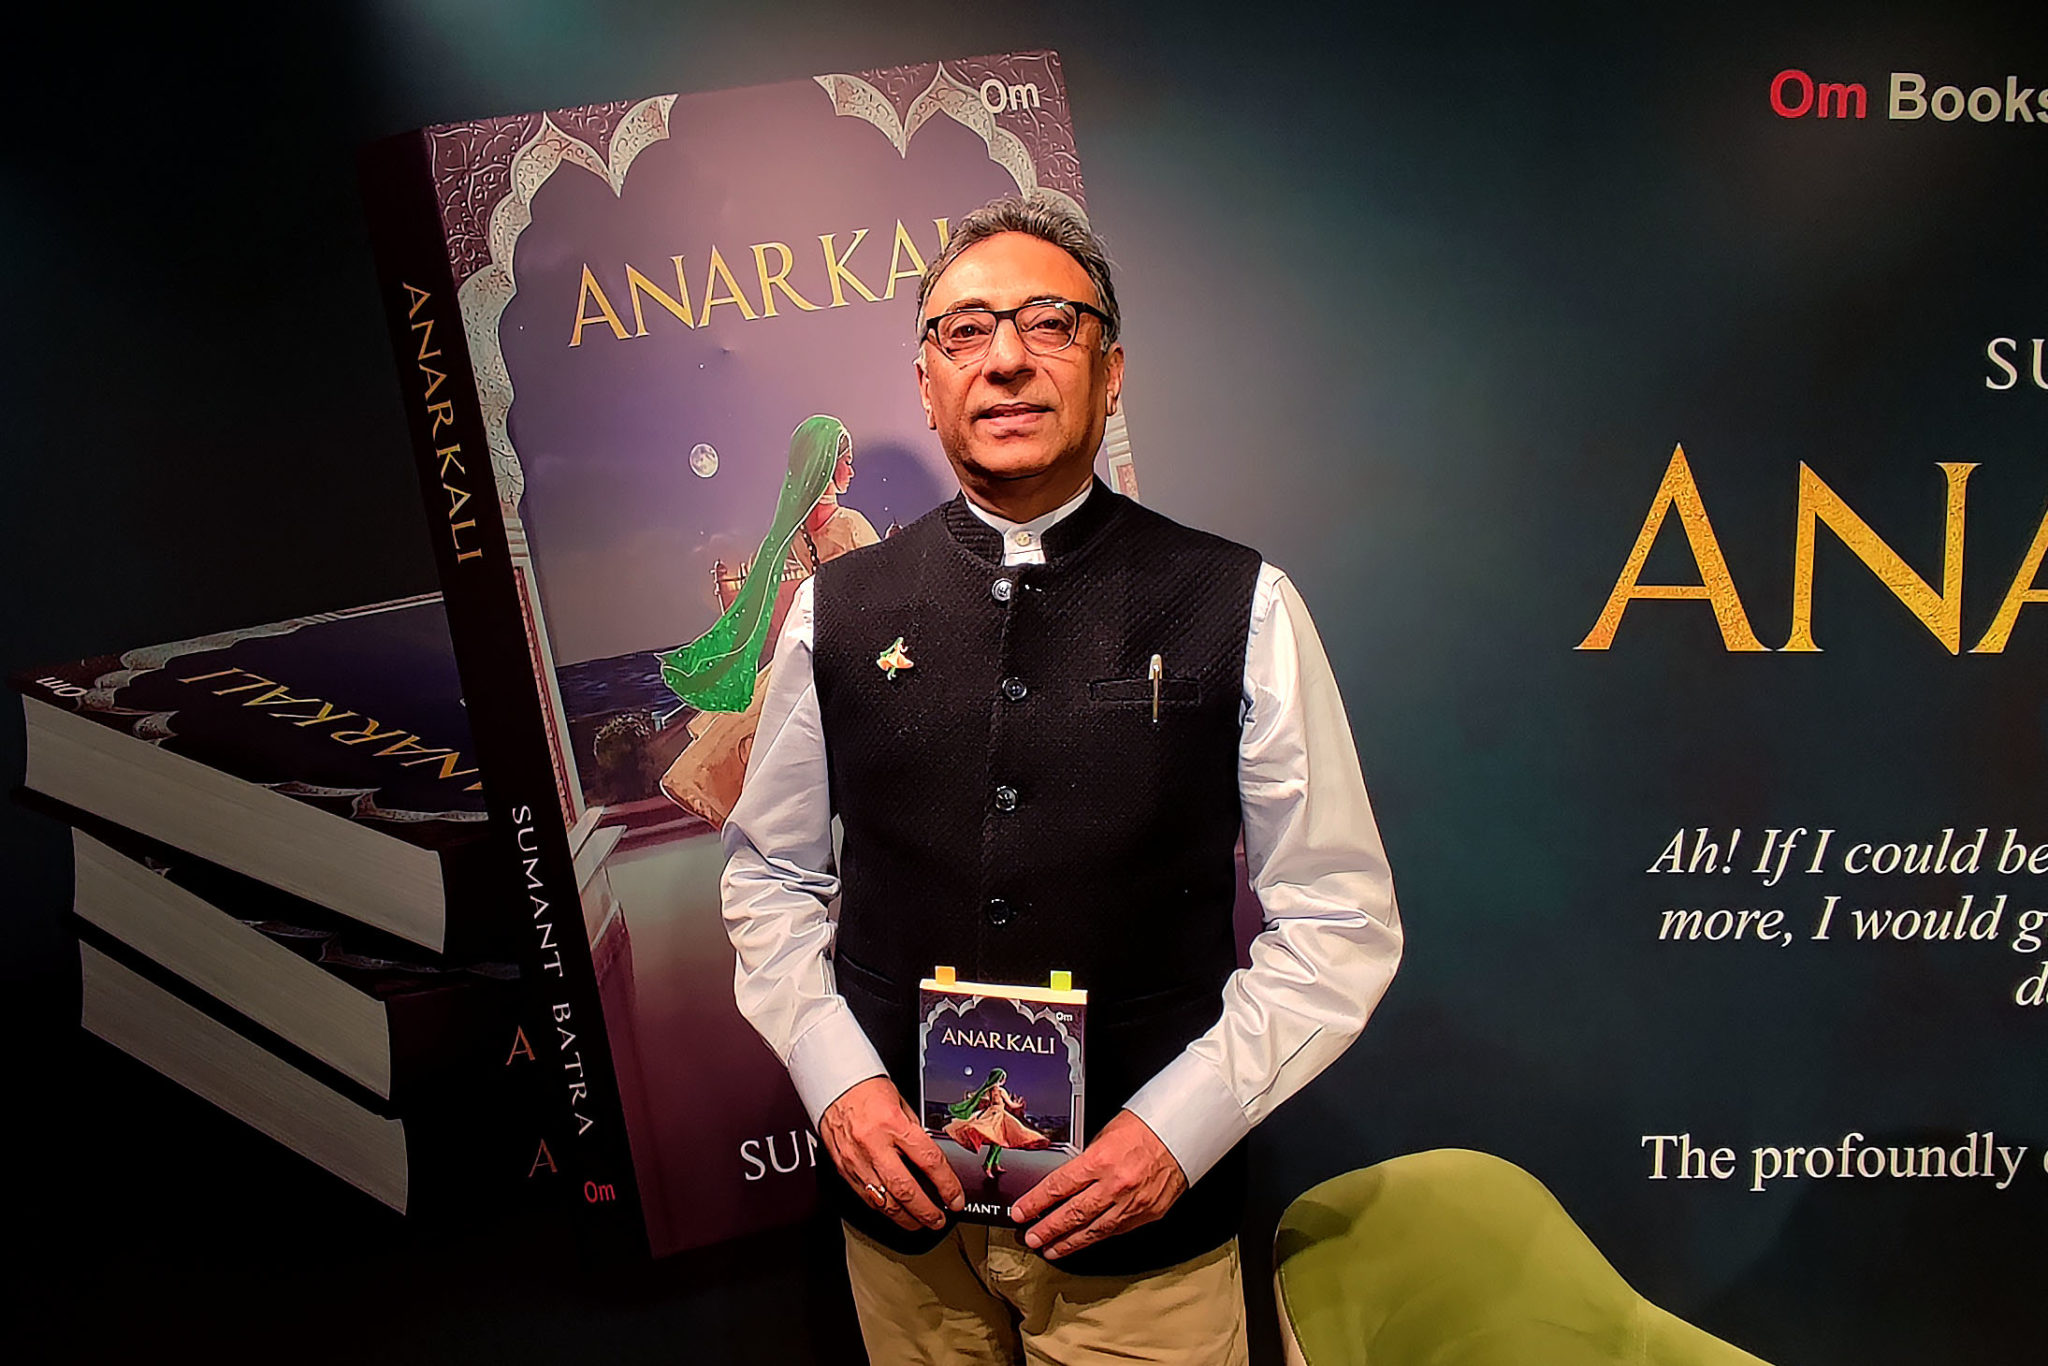 Interview: From a Tour Guide’s Story to a Book, Author Sumant Batra Tells us How Anarkali Came Into Being